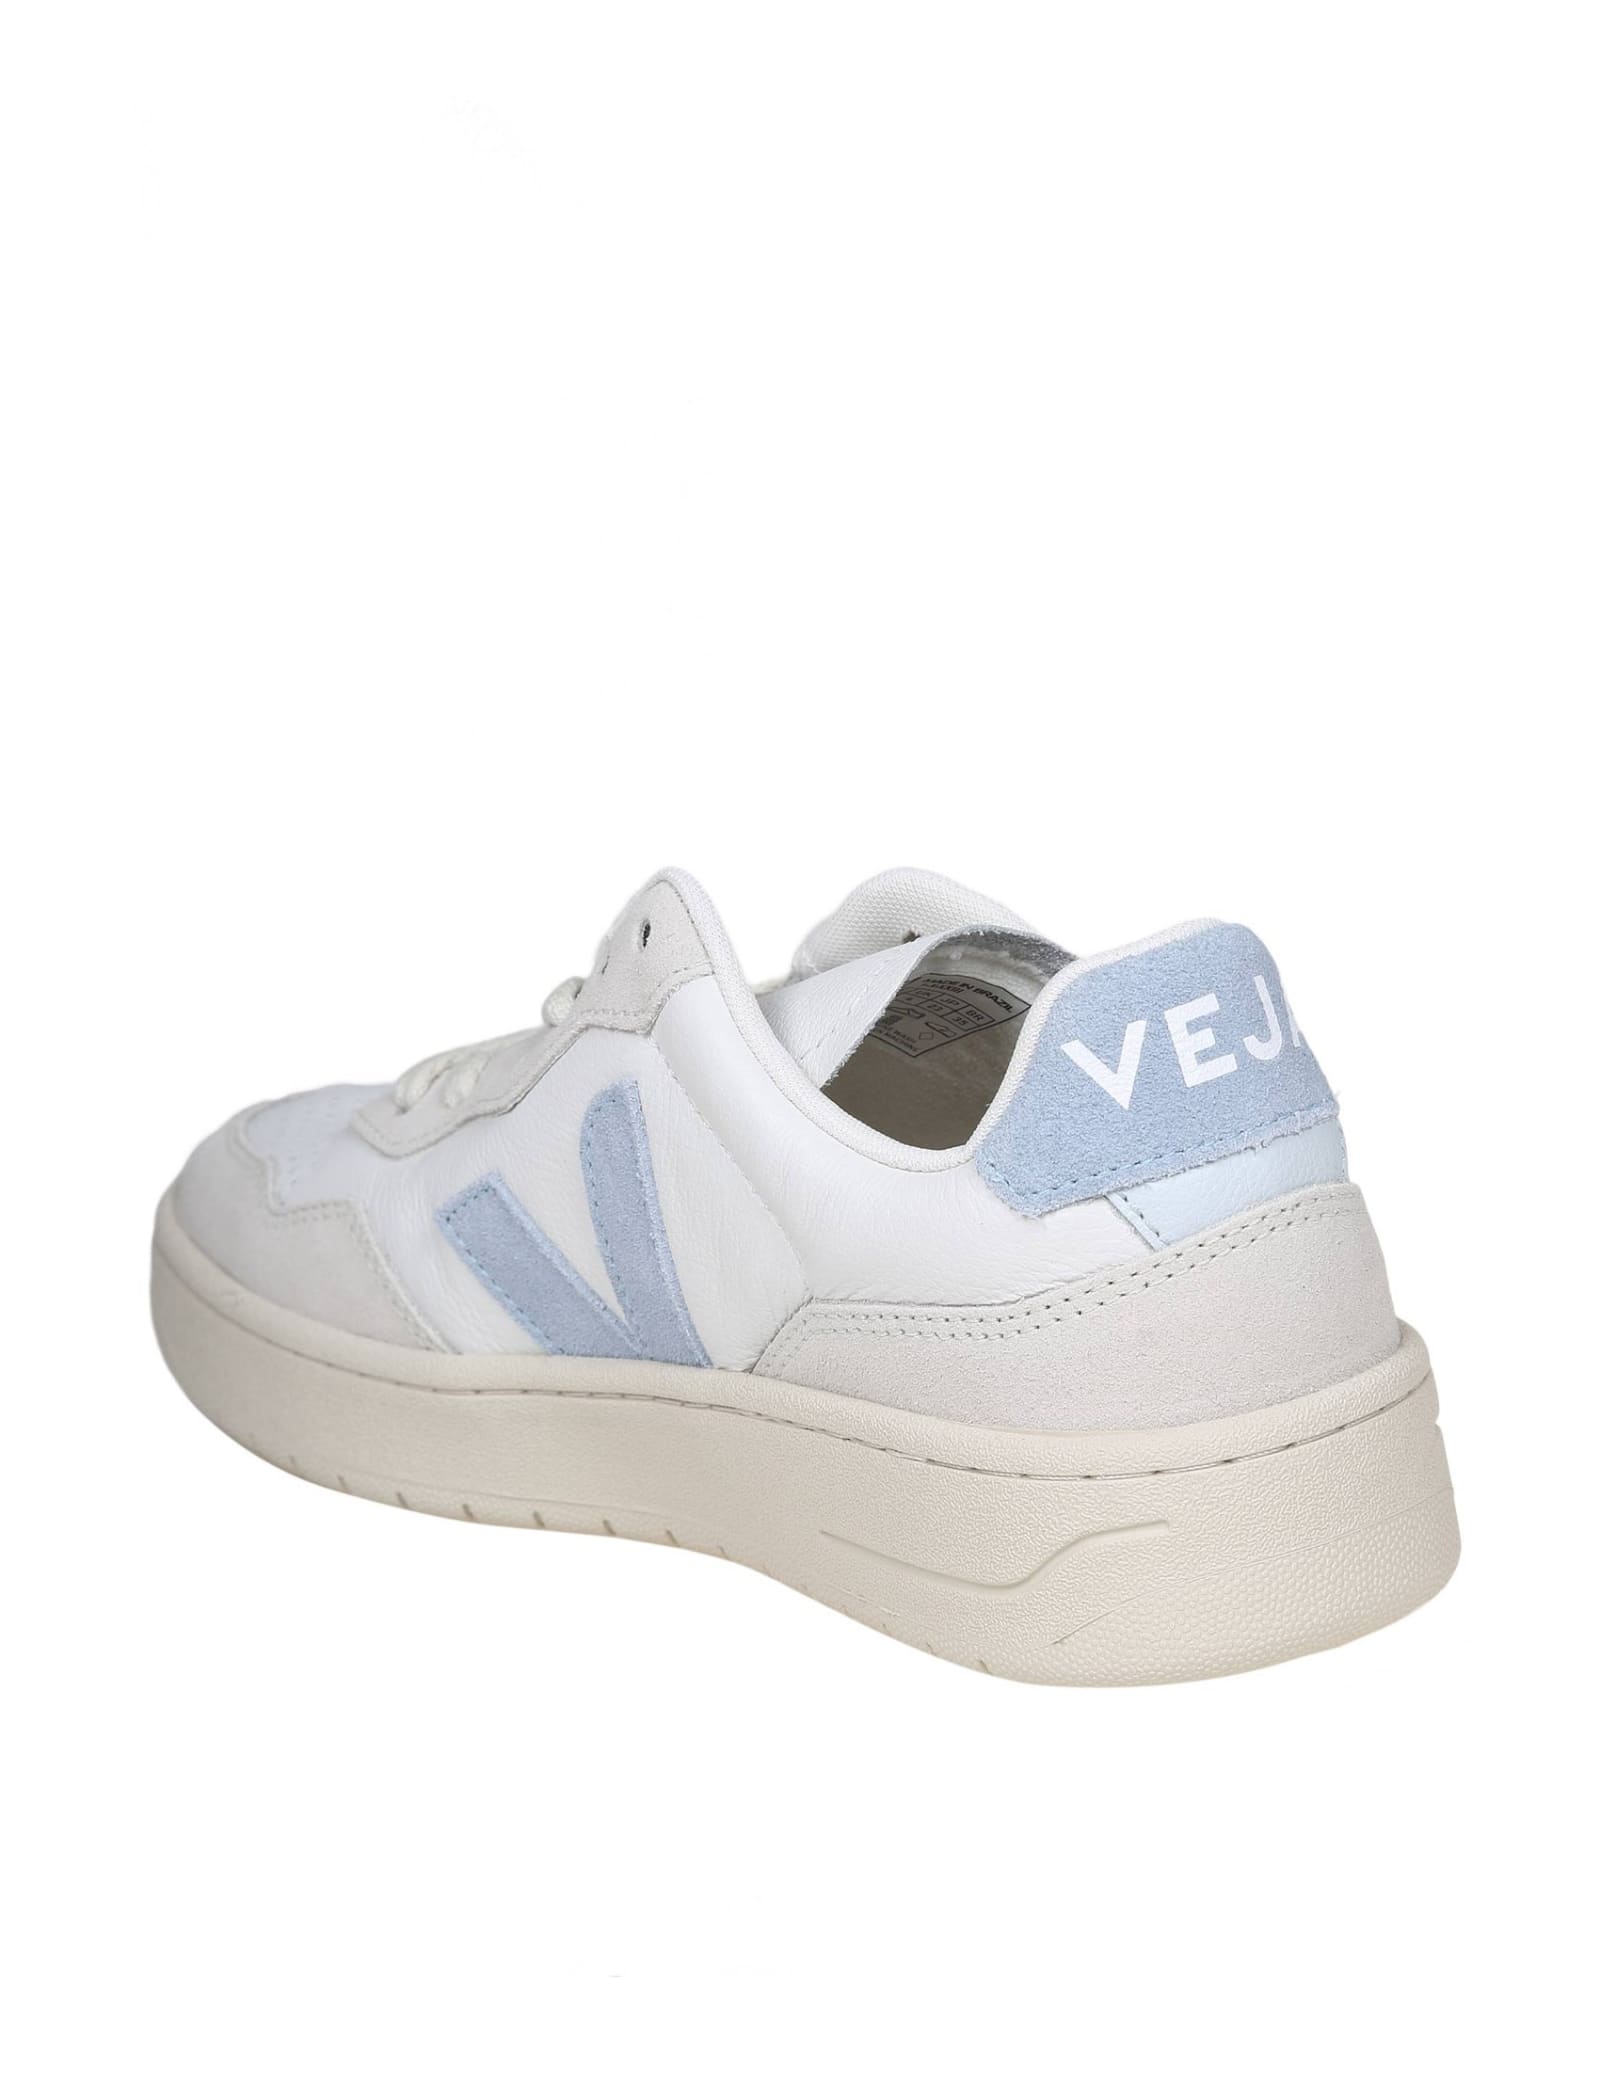 Shop Veja V 90 Sneakers In White And Light Blue Leather And Suede